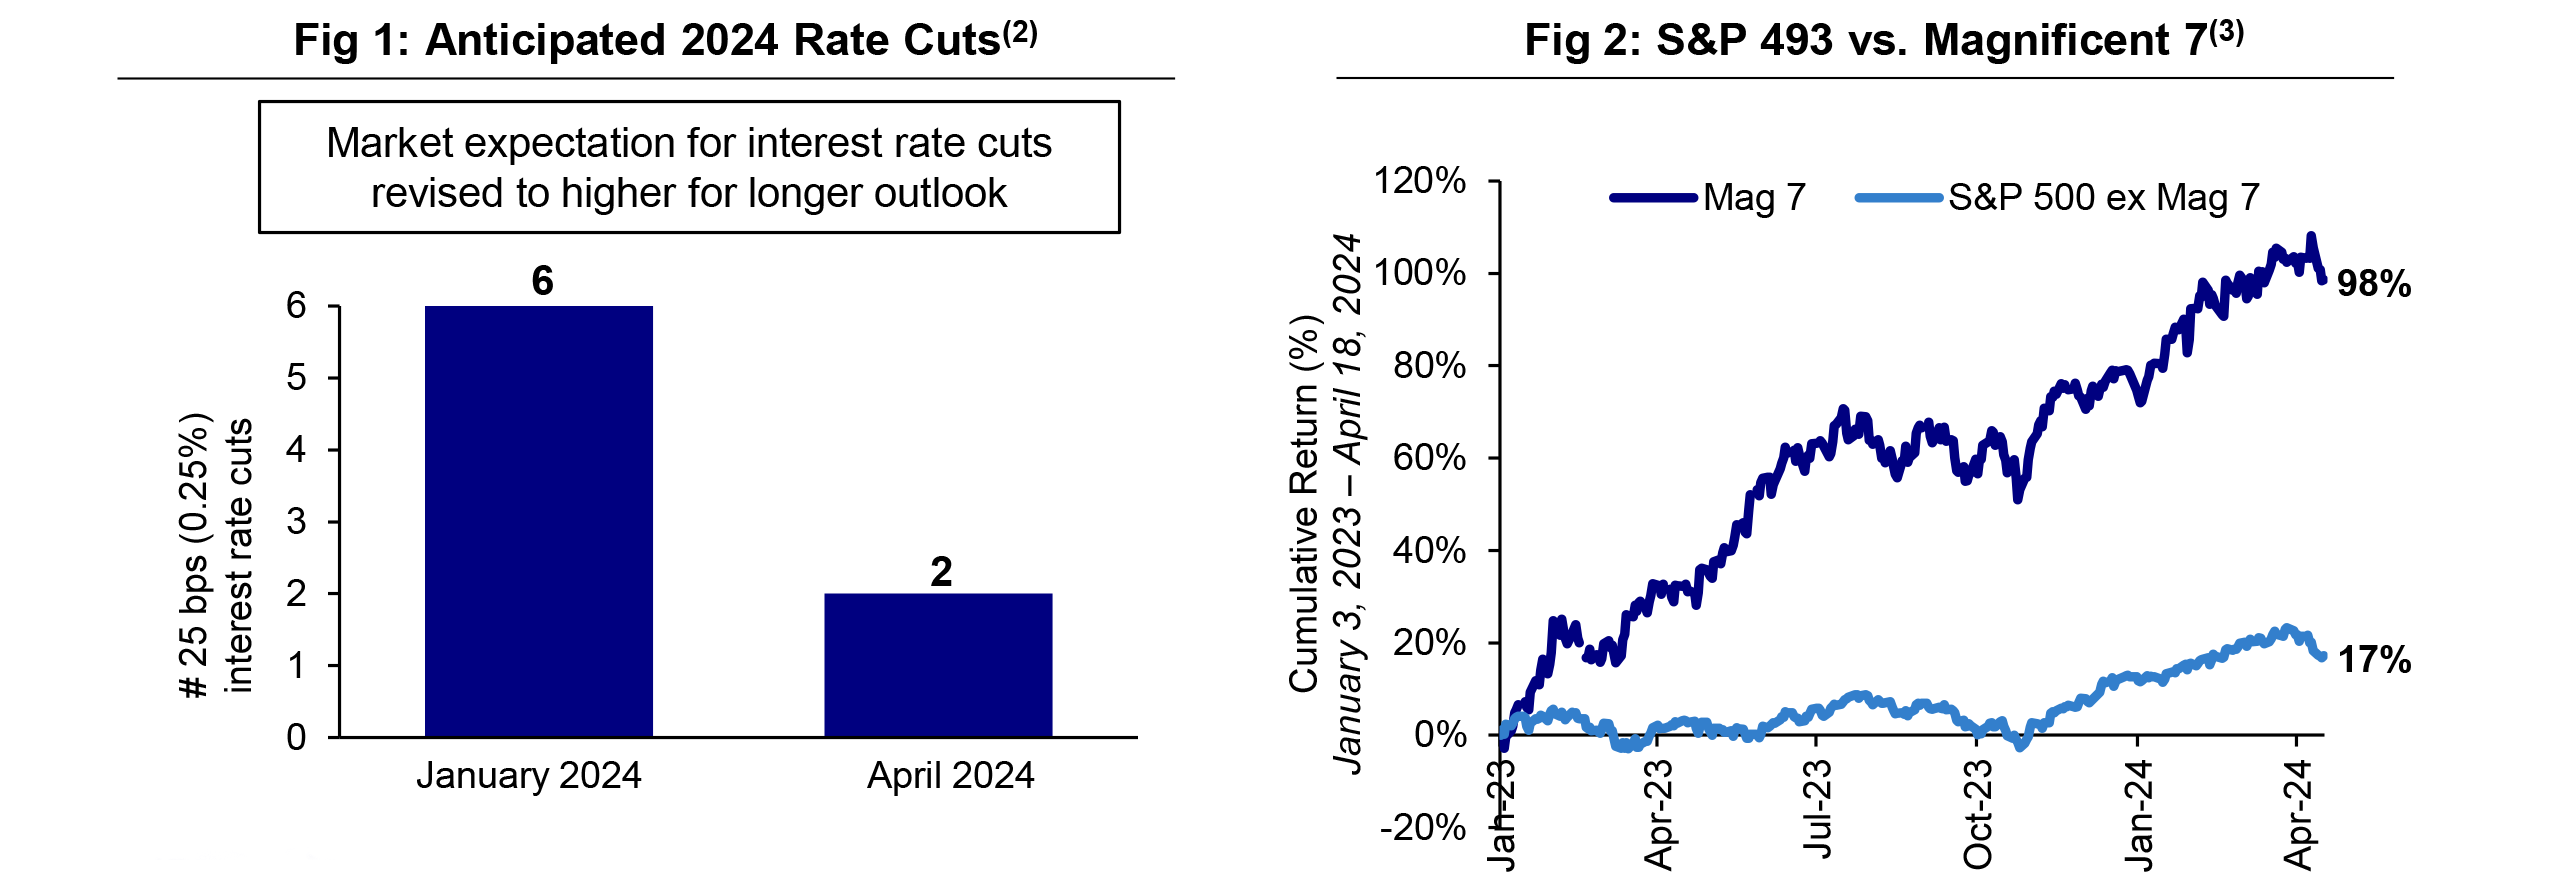 anticipated 2024 rate cuts  and S&P 493 vs Magnificent 7 graph charts